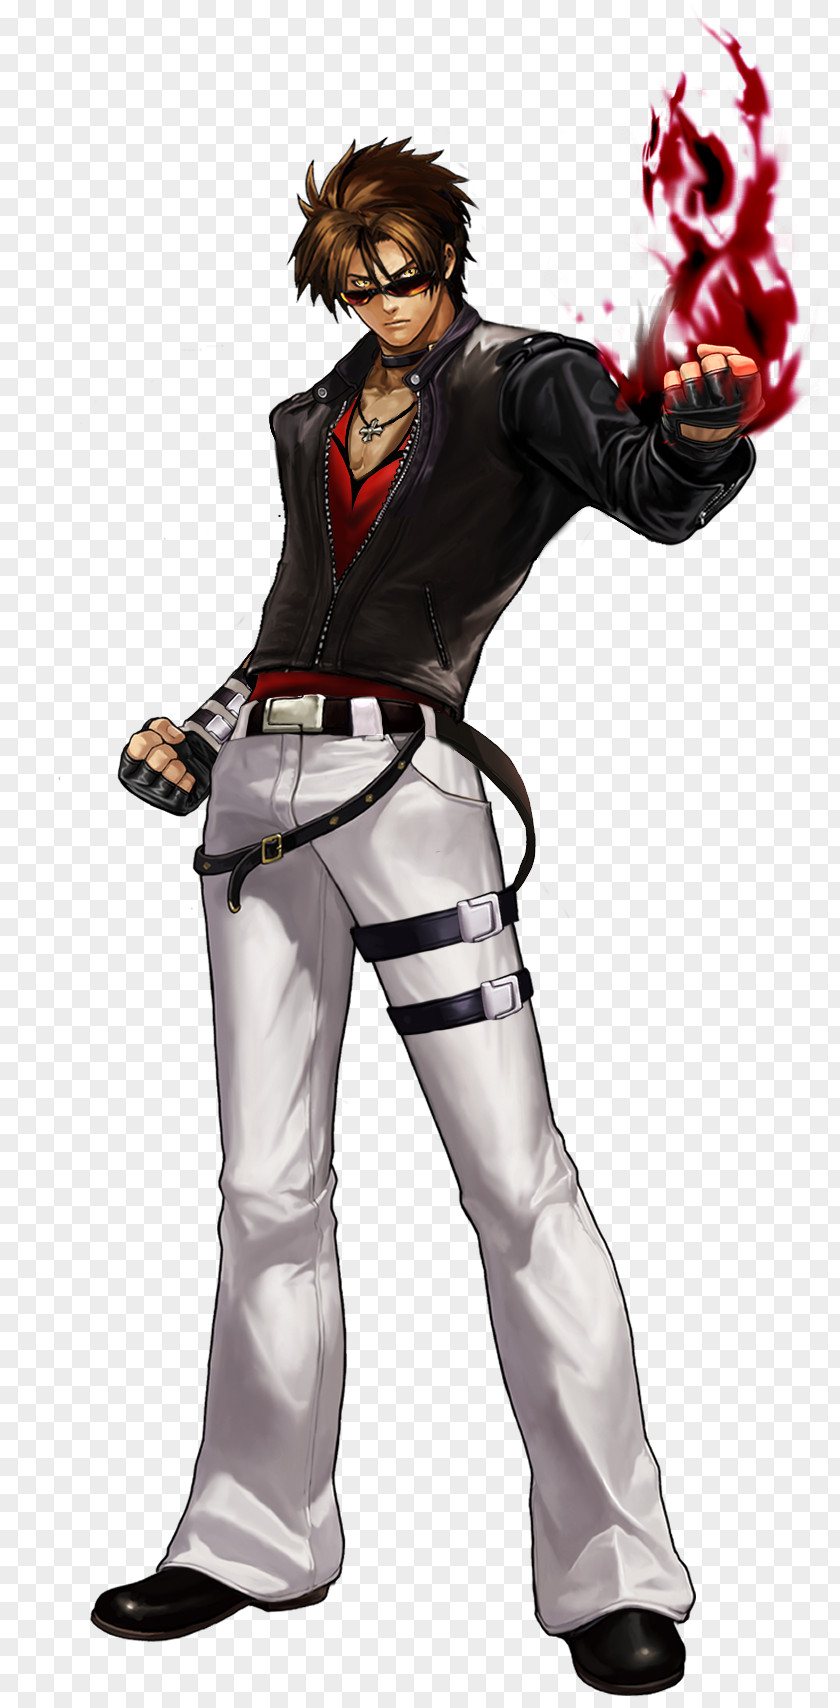 King Of Fighters Xi The XIII Kyo Kusanagi M.U.G.E.N SNK Character PNG